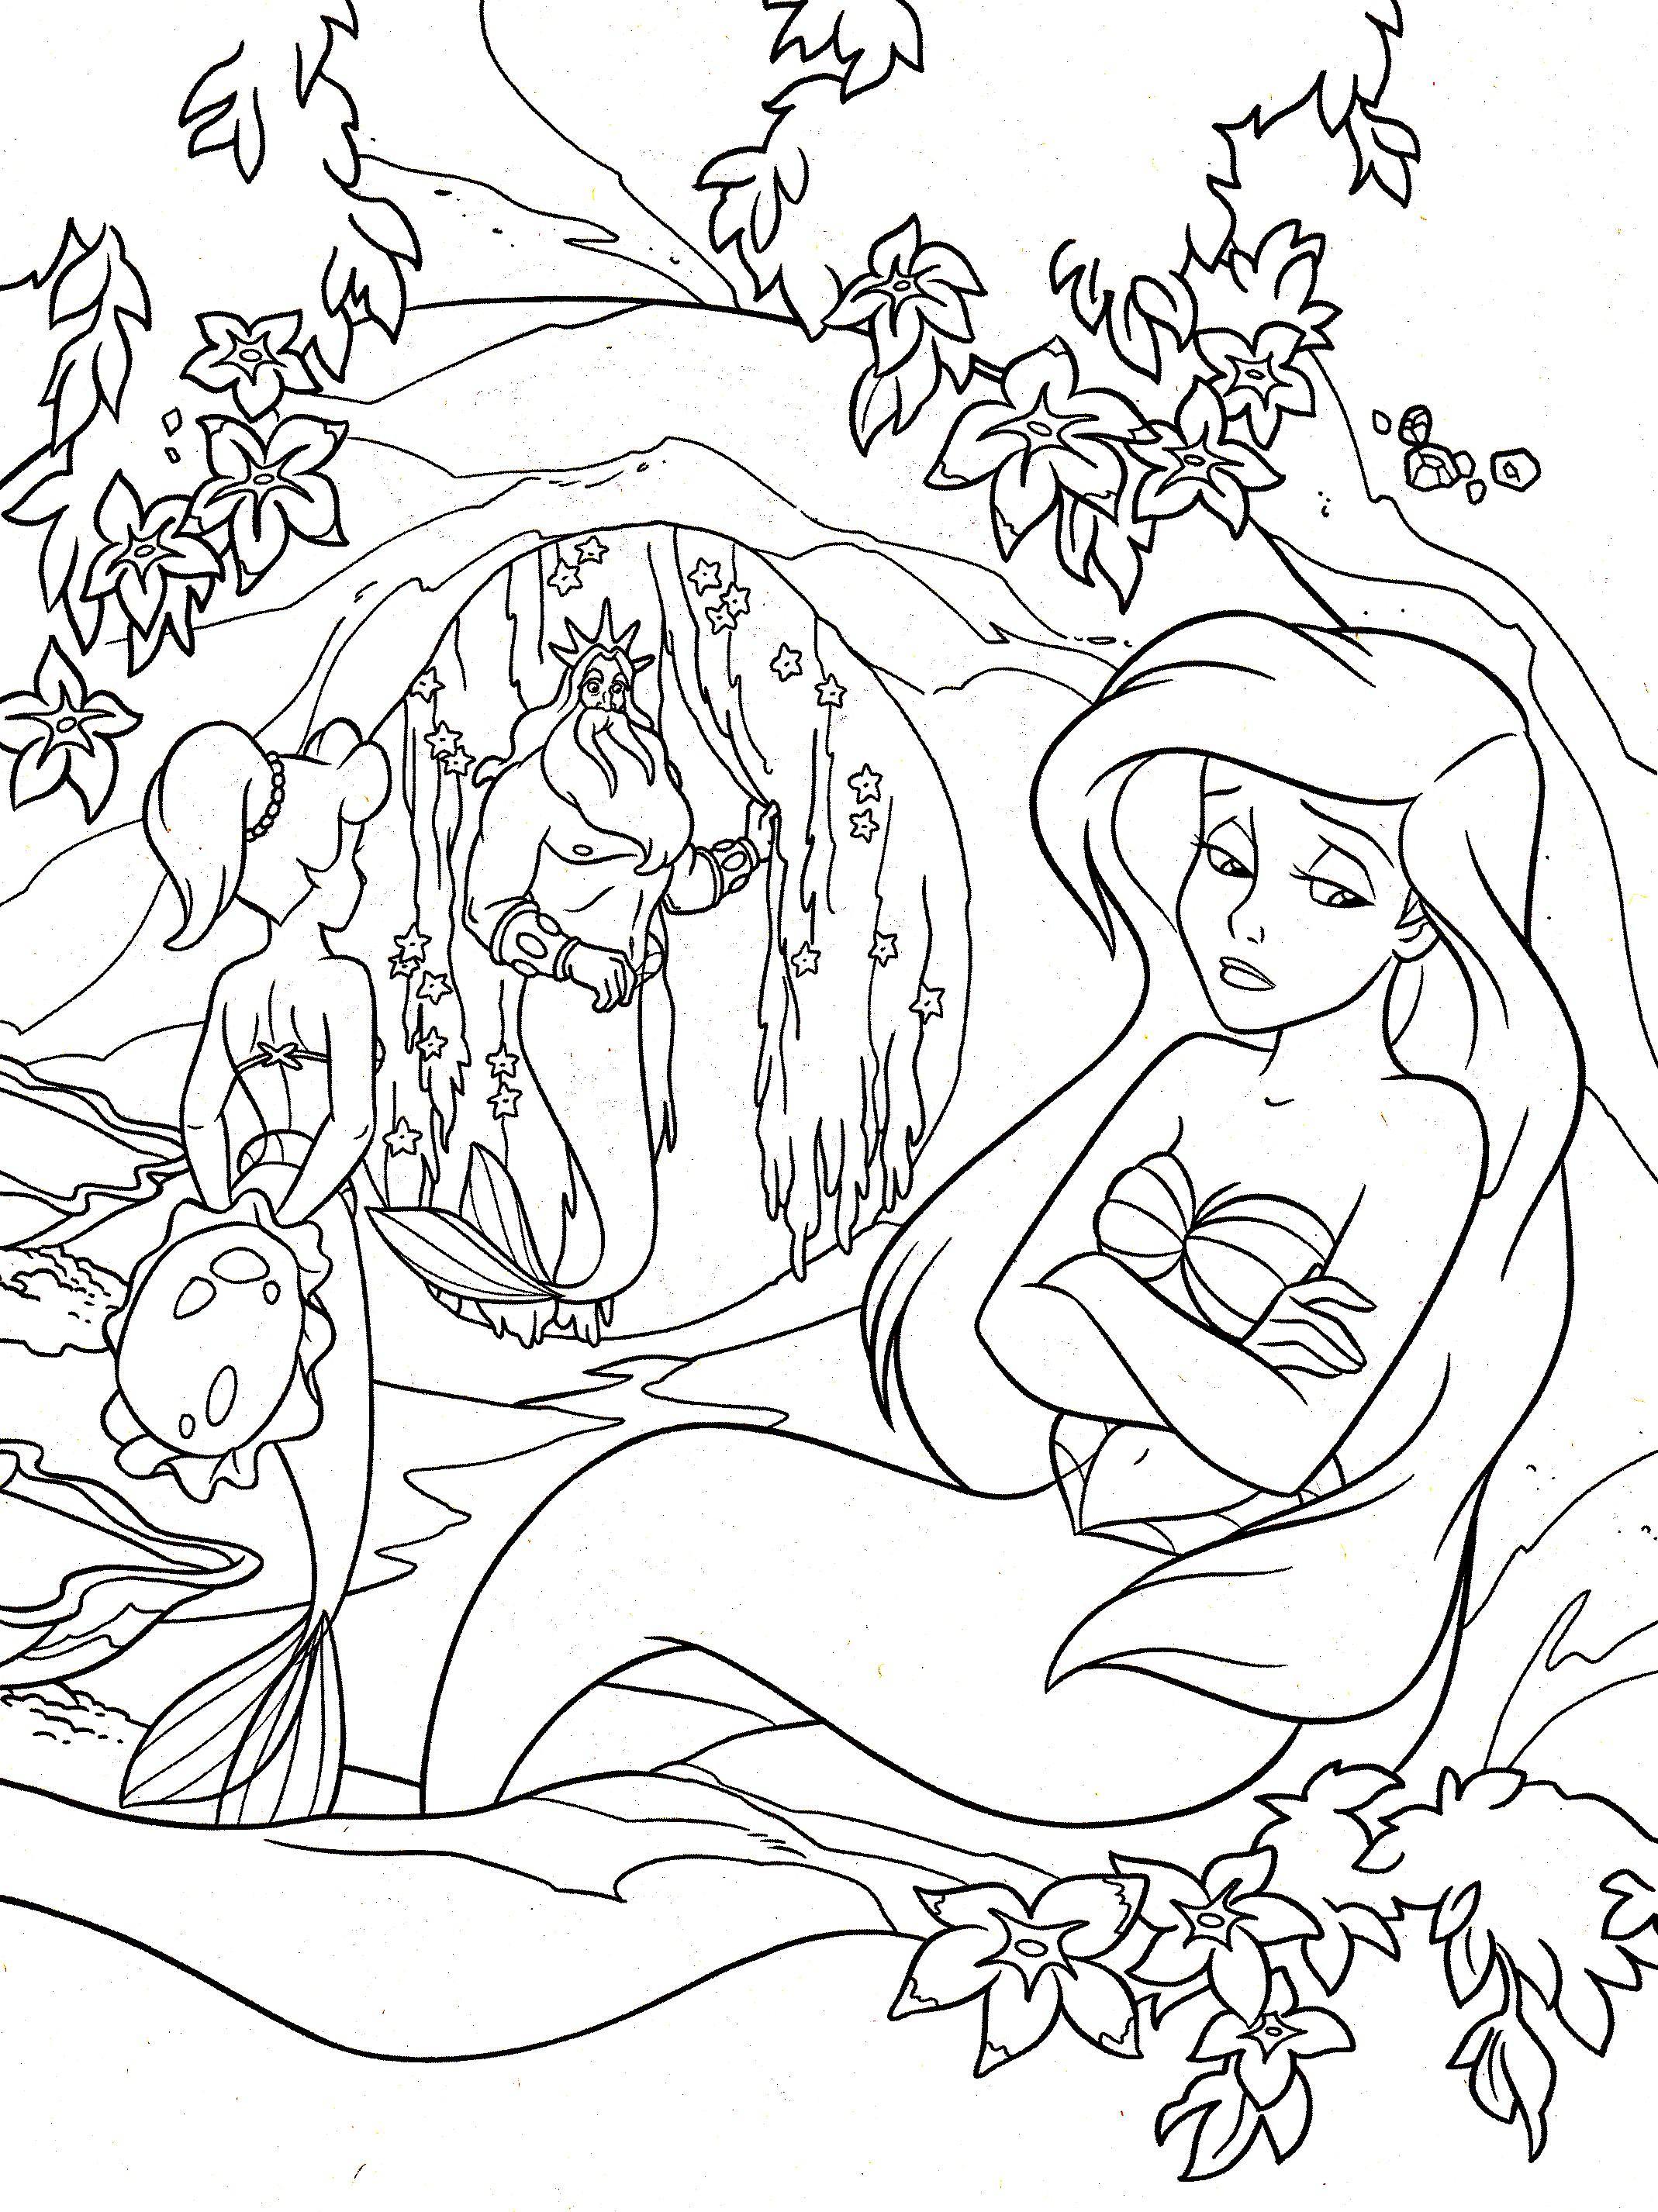 Ariel The Little Mermaid Return To Childhood Adult Coloring Pages